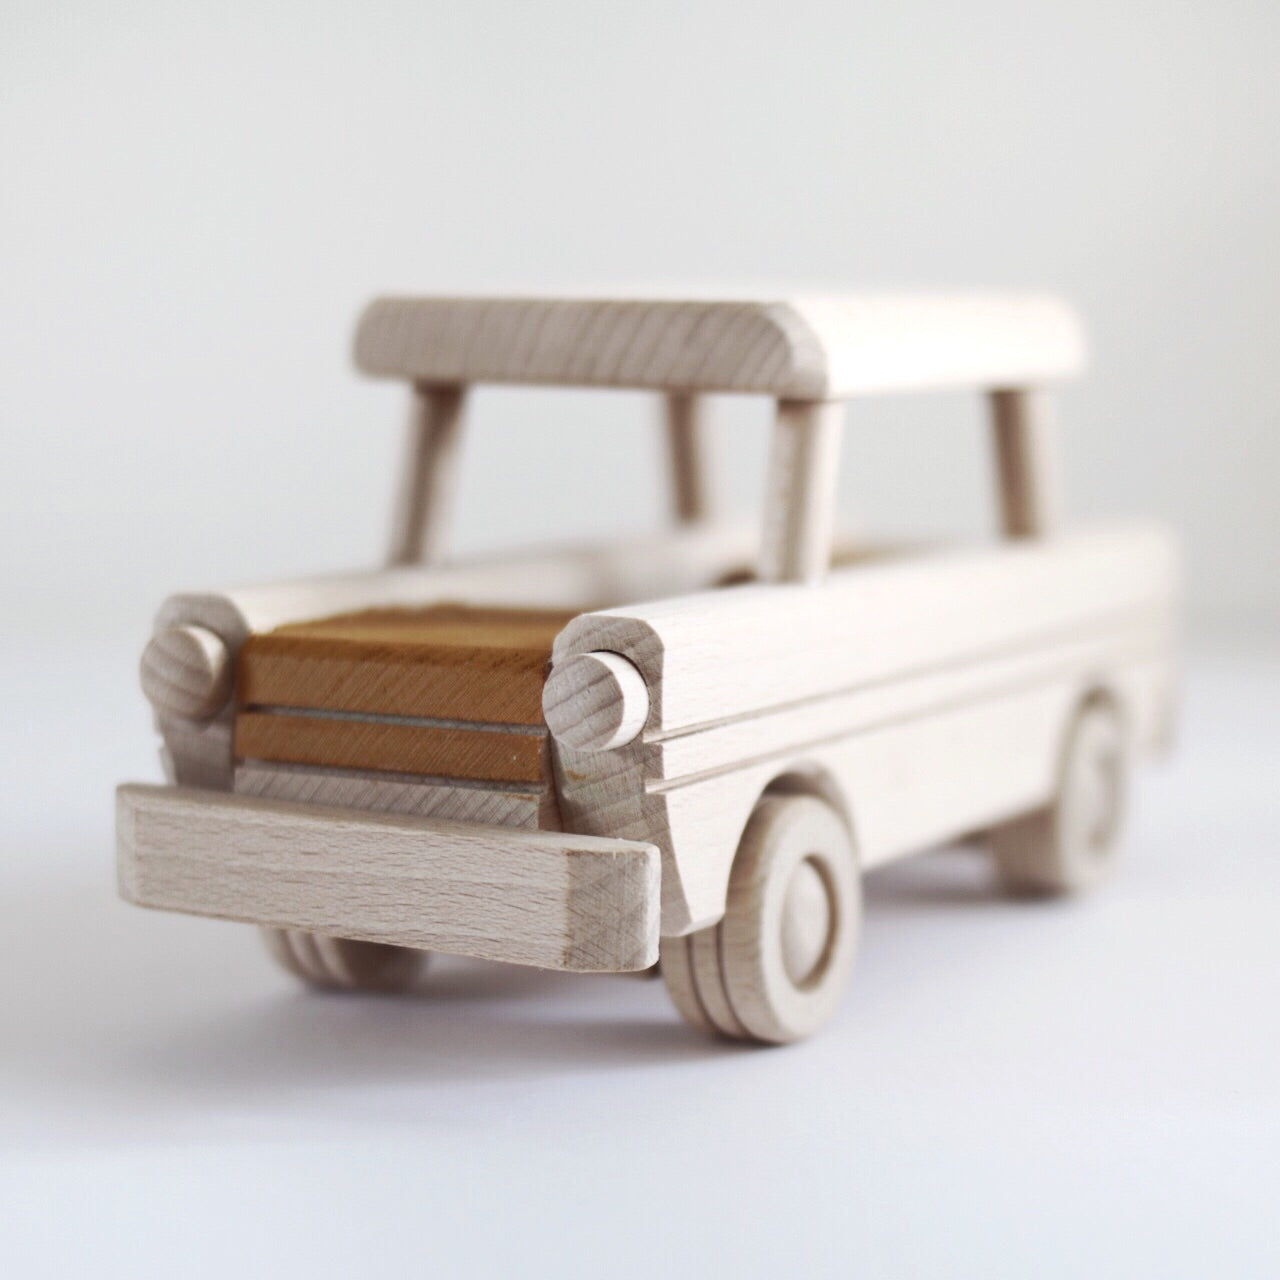 Handmade Wooden Toys, Unique Handcrafted Toys